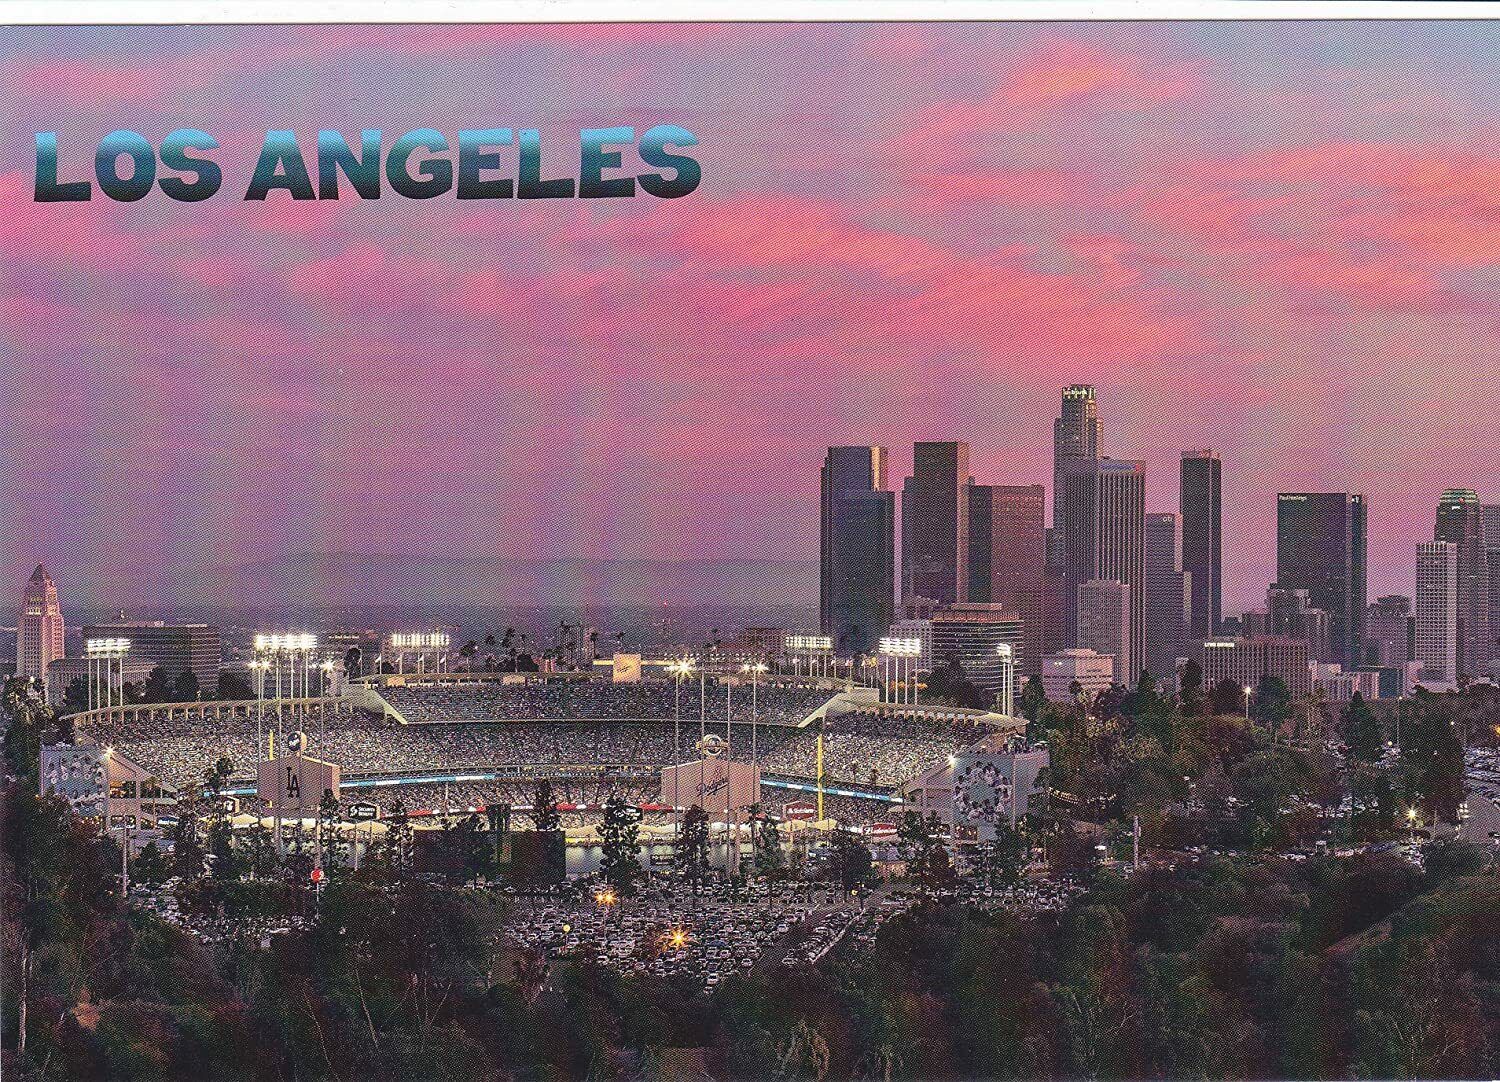 LA SKYLINE AT DUSK WITH   - One 1 Card  LA 1273 -  DODGER STADIUM IN FOREGROUND